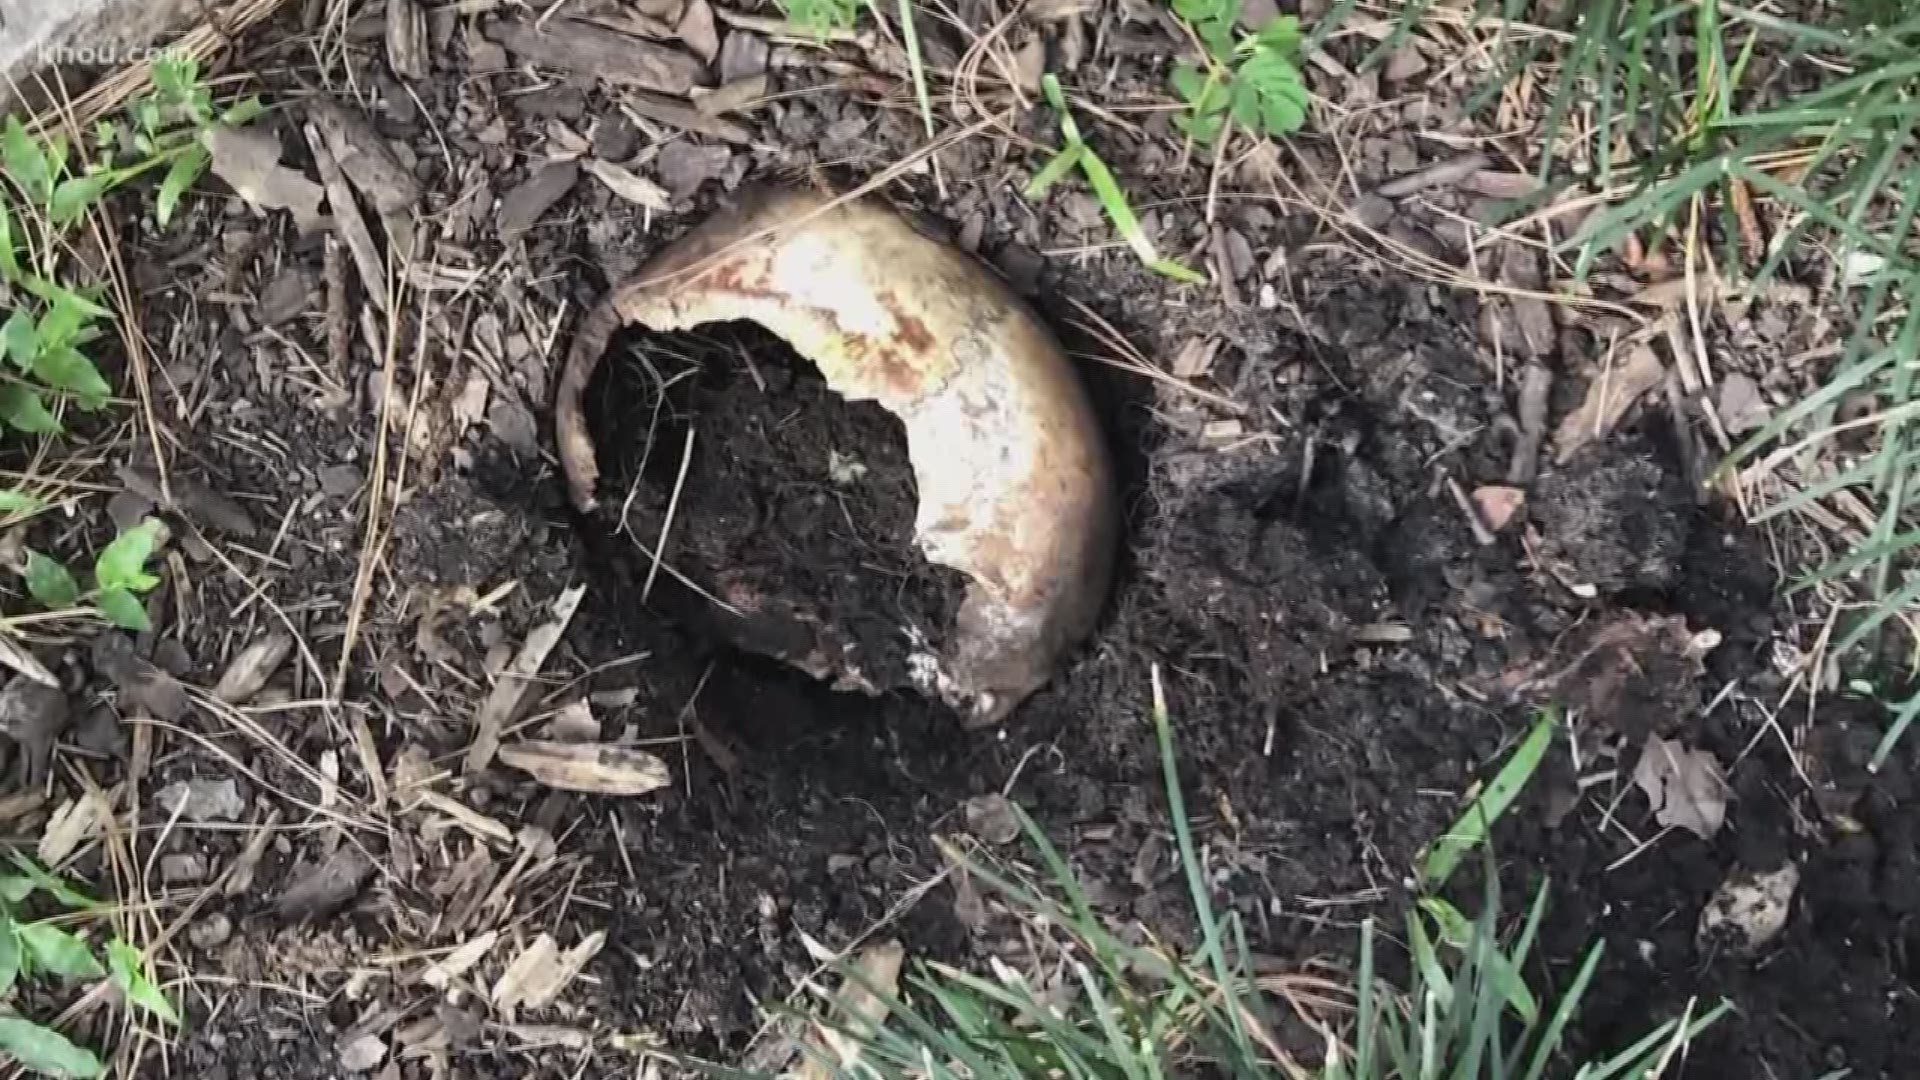 New homeowners in Champion Forest were digging up their flowerbed earlier this year when they found a real human skull buried in the dirt.